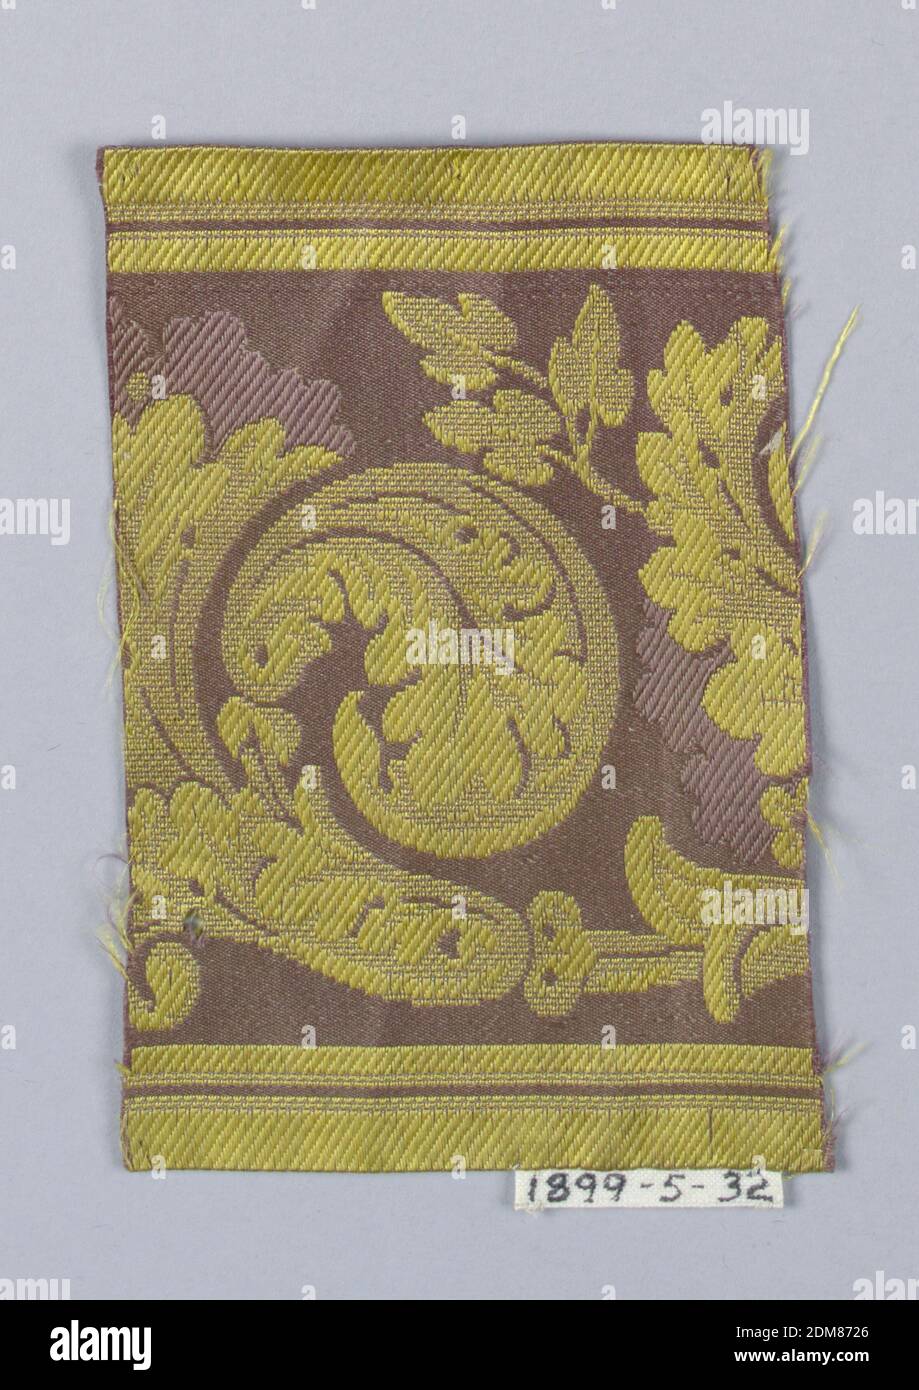 Trimming fragment, Medium: silk Technique: woven, Scrolling leaf in yellows on plum ground., France, ca. 1830, woven textiles, Trimming fragment Stock Photo